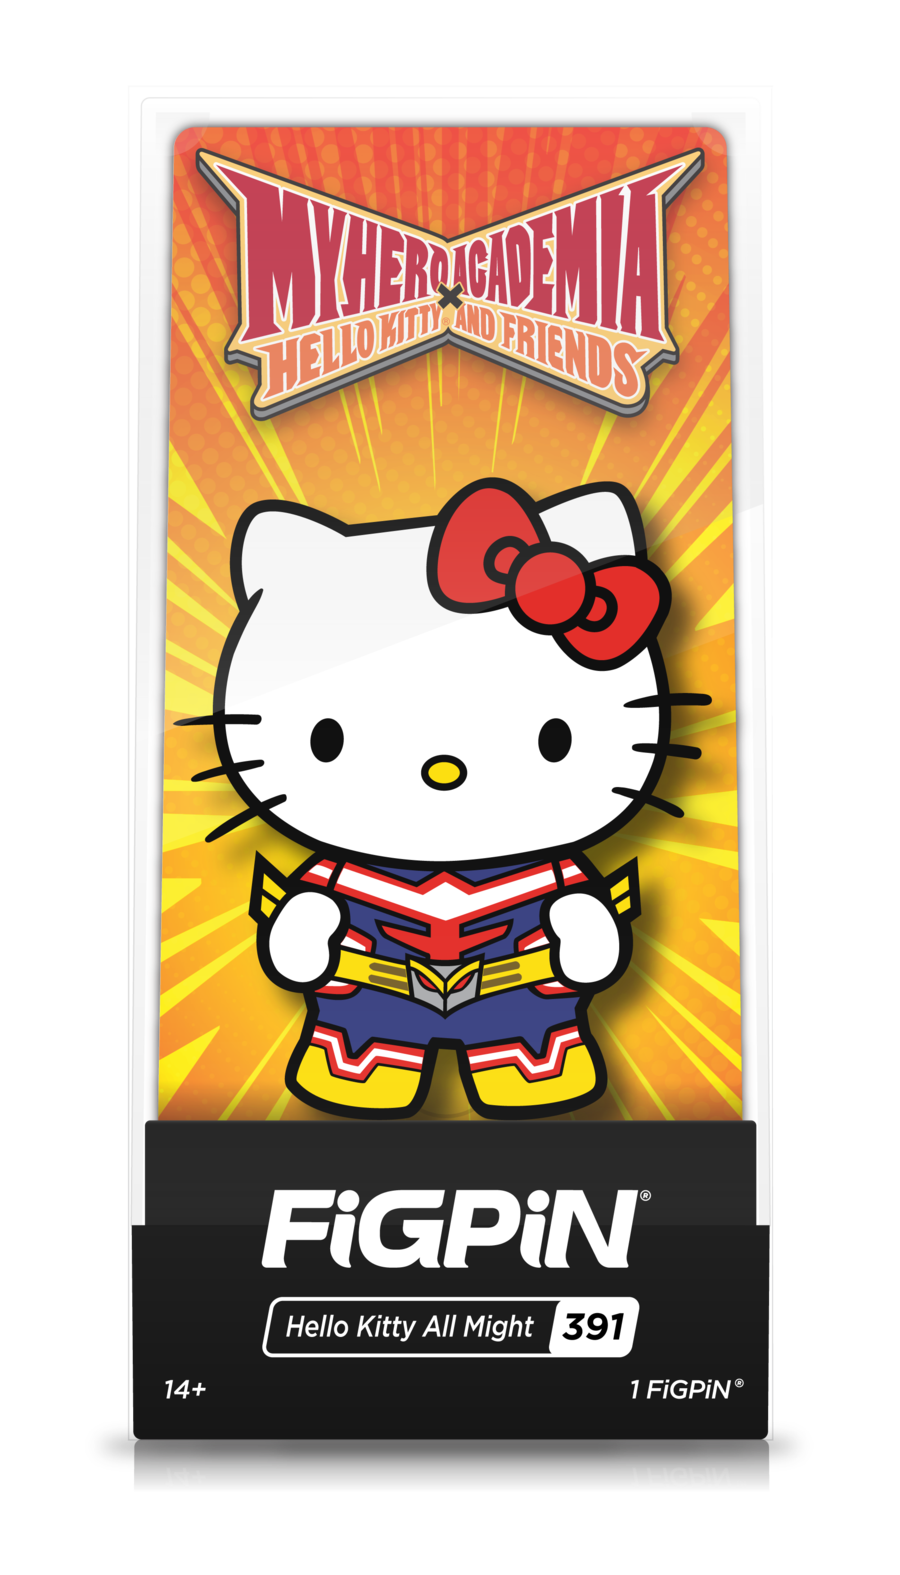 My Hero Academia - Hello Kitty All Might FiGPiN (#391) image count 1